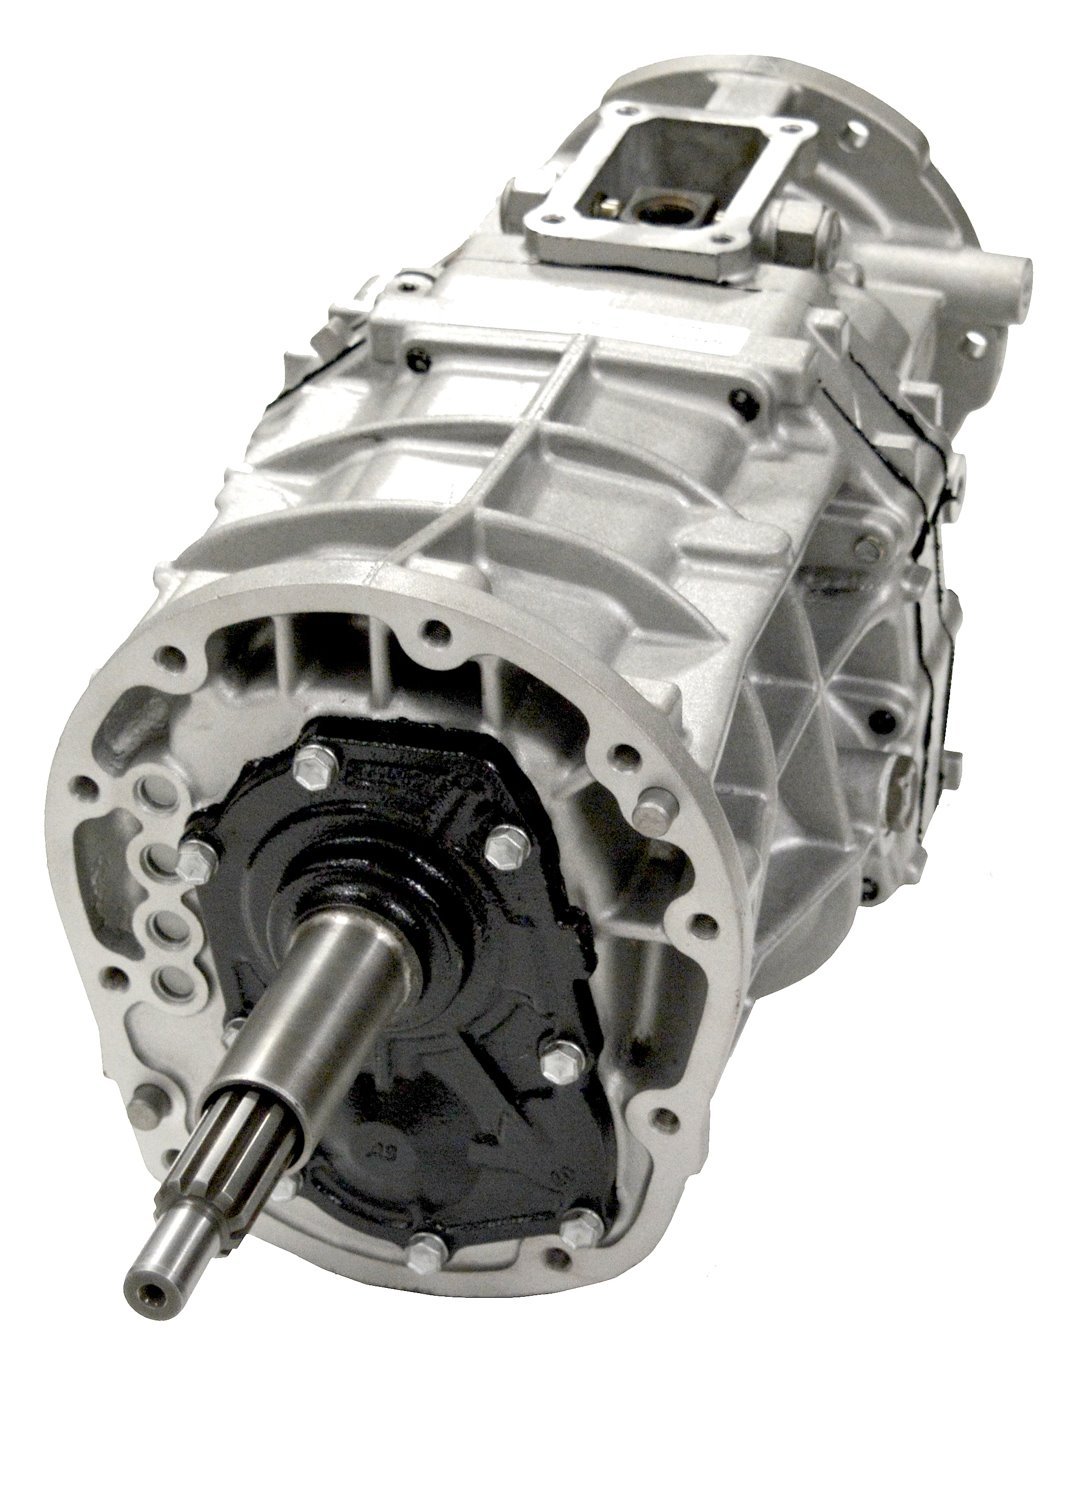 Remanufactured AX15 Manual Transmission for Jeep 94-95 Wrangler, 5 Speed